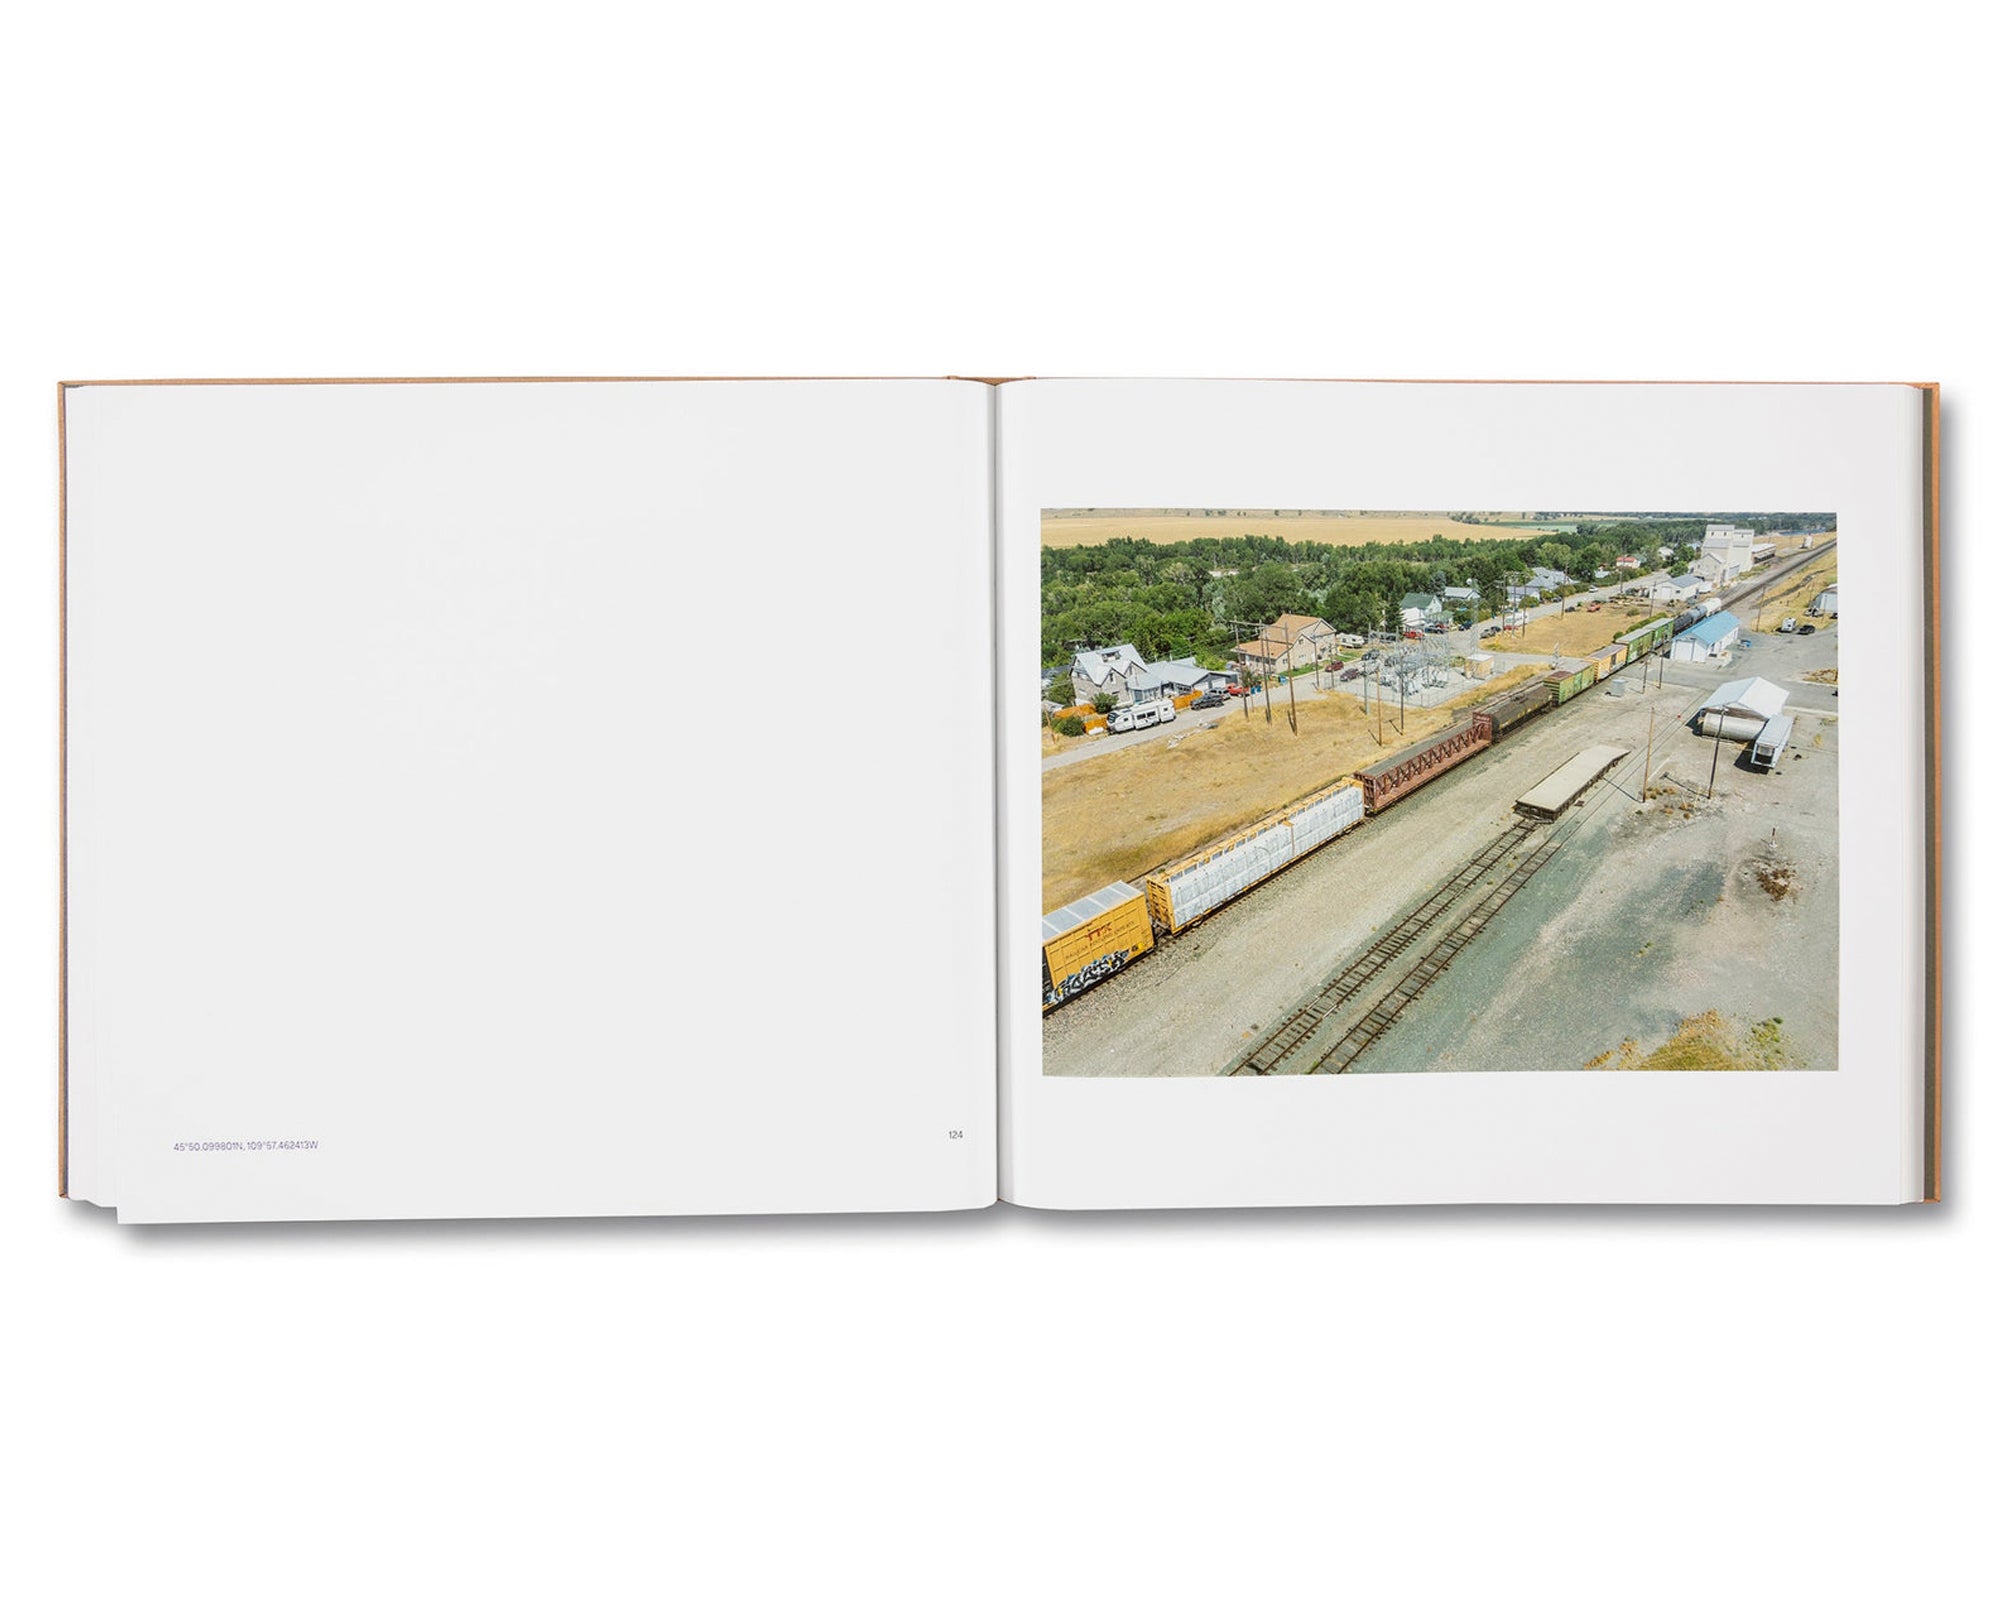 TOPOGRAPHIES: AERIAL SURVEYS OF THE AMERICAN LANDSCAPE by Stephen Shore [SIGNED]